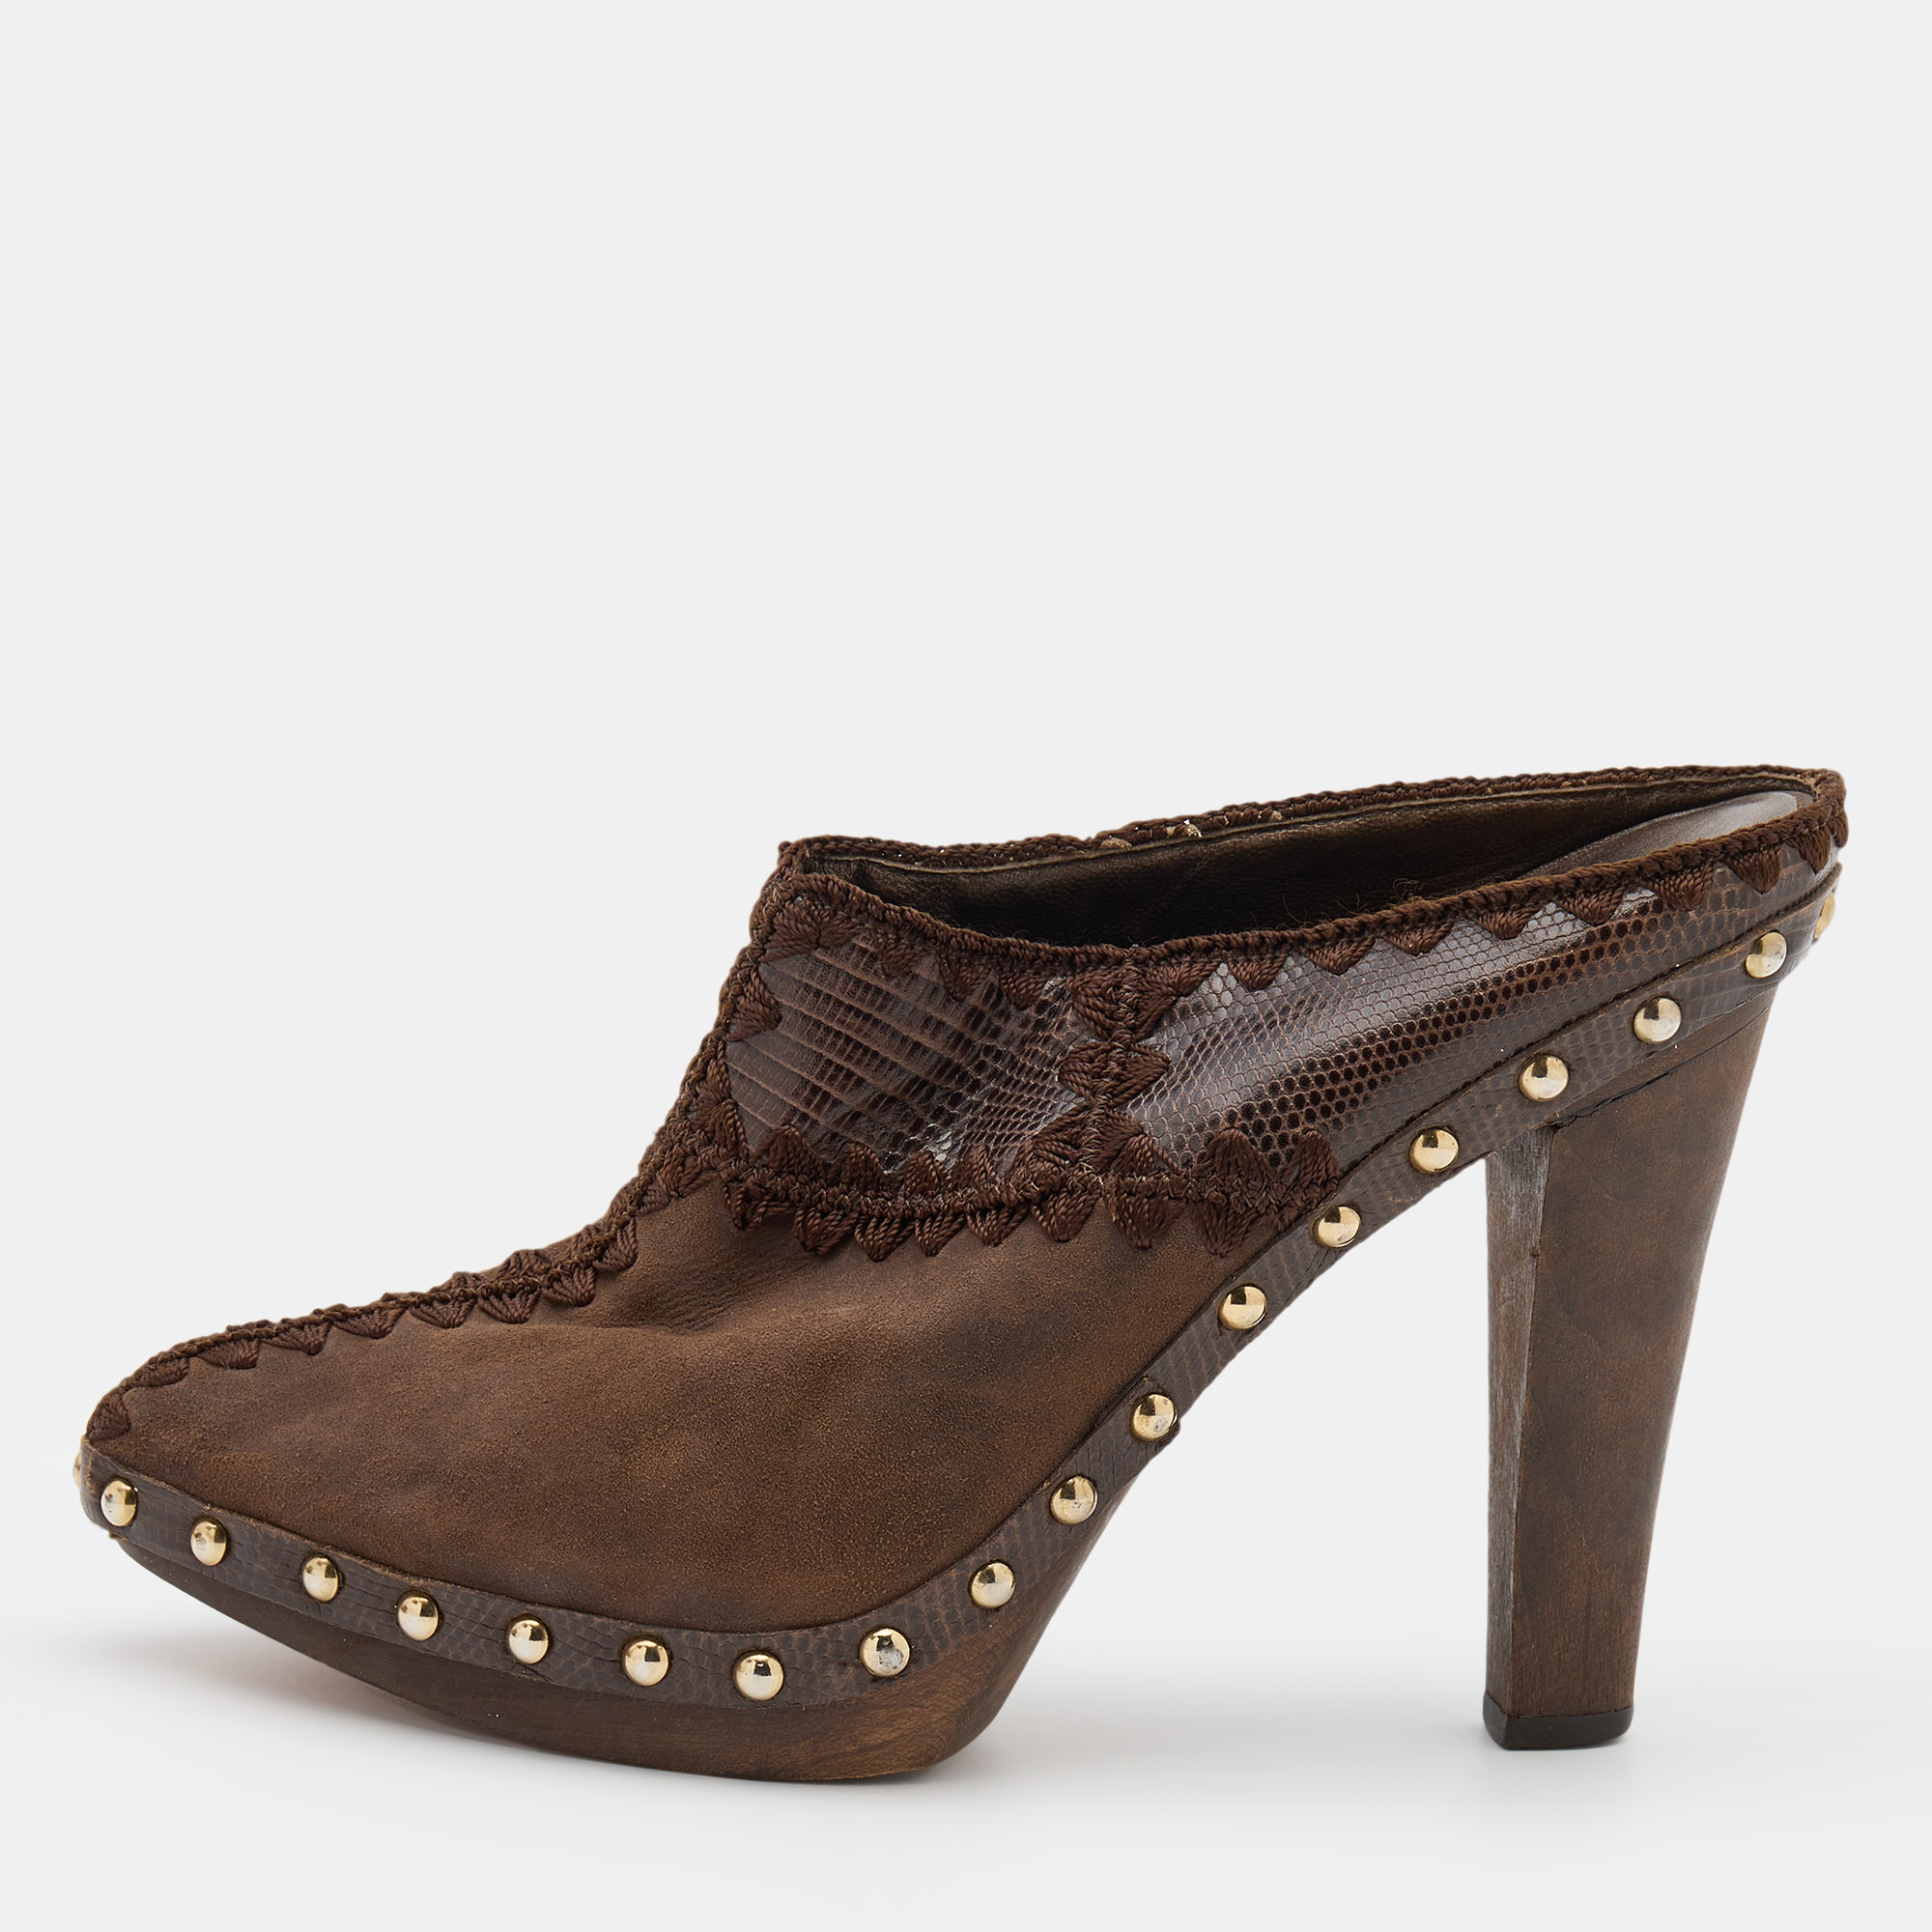 Pre-owned Sergio Rossi Brown Lizard Embossed Leather And Suede Studded Platform Mules Size 37.5